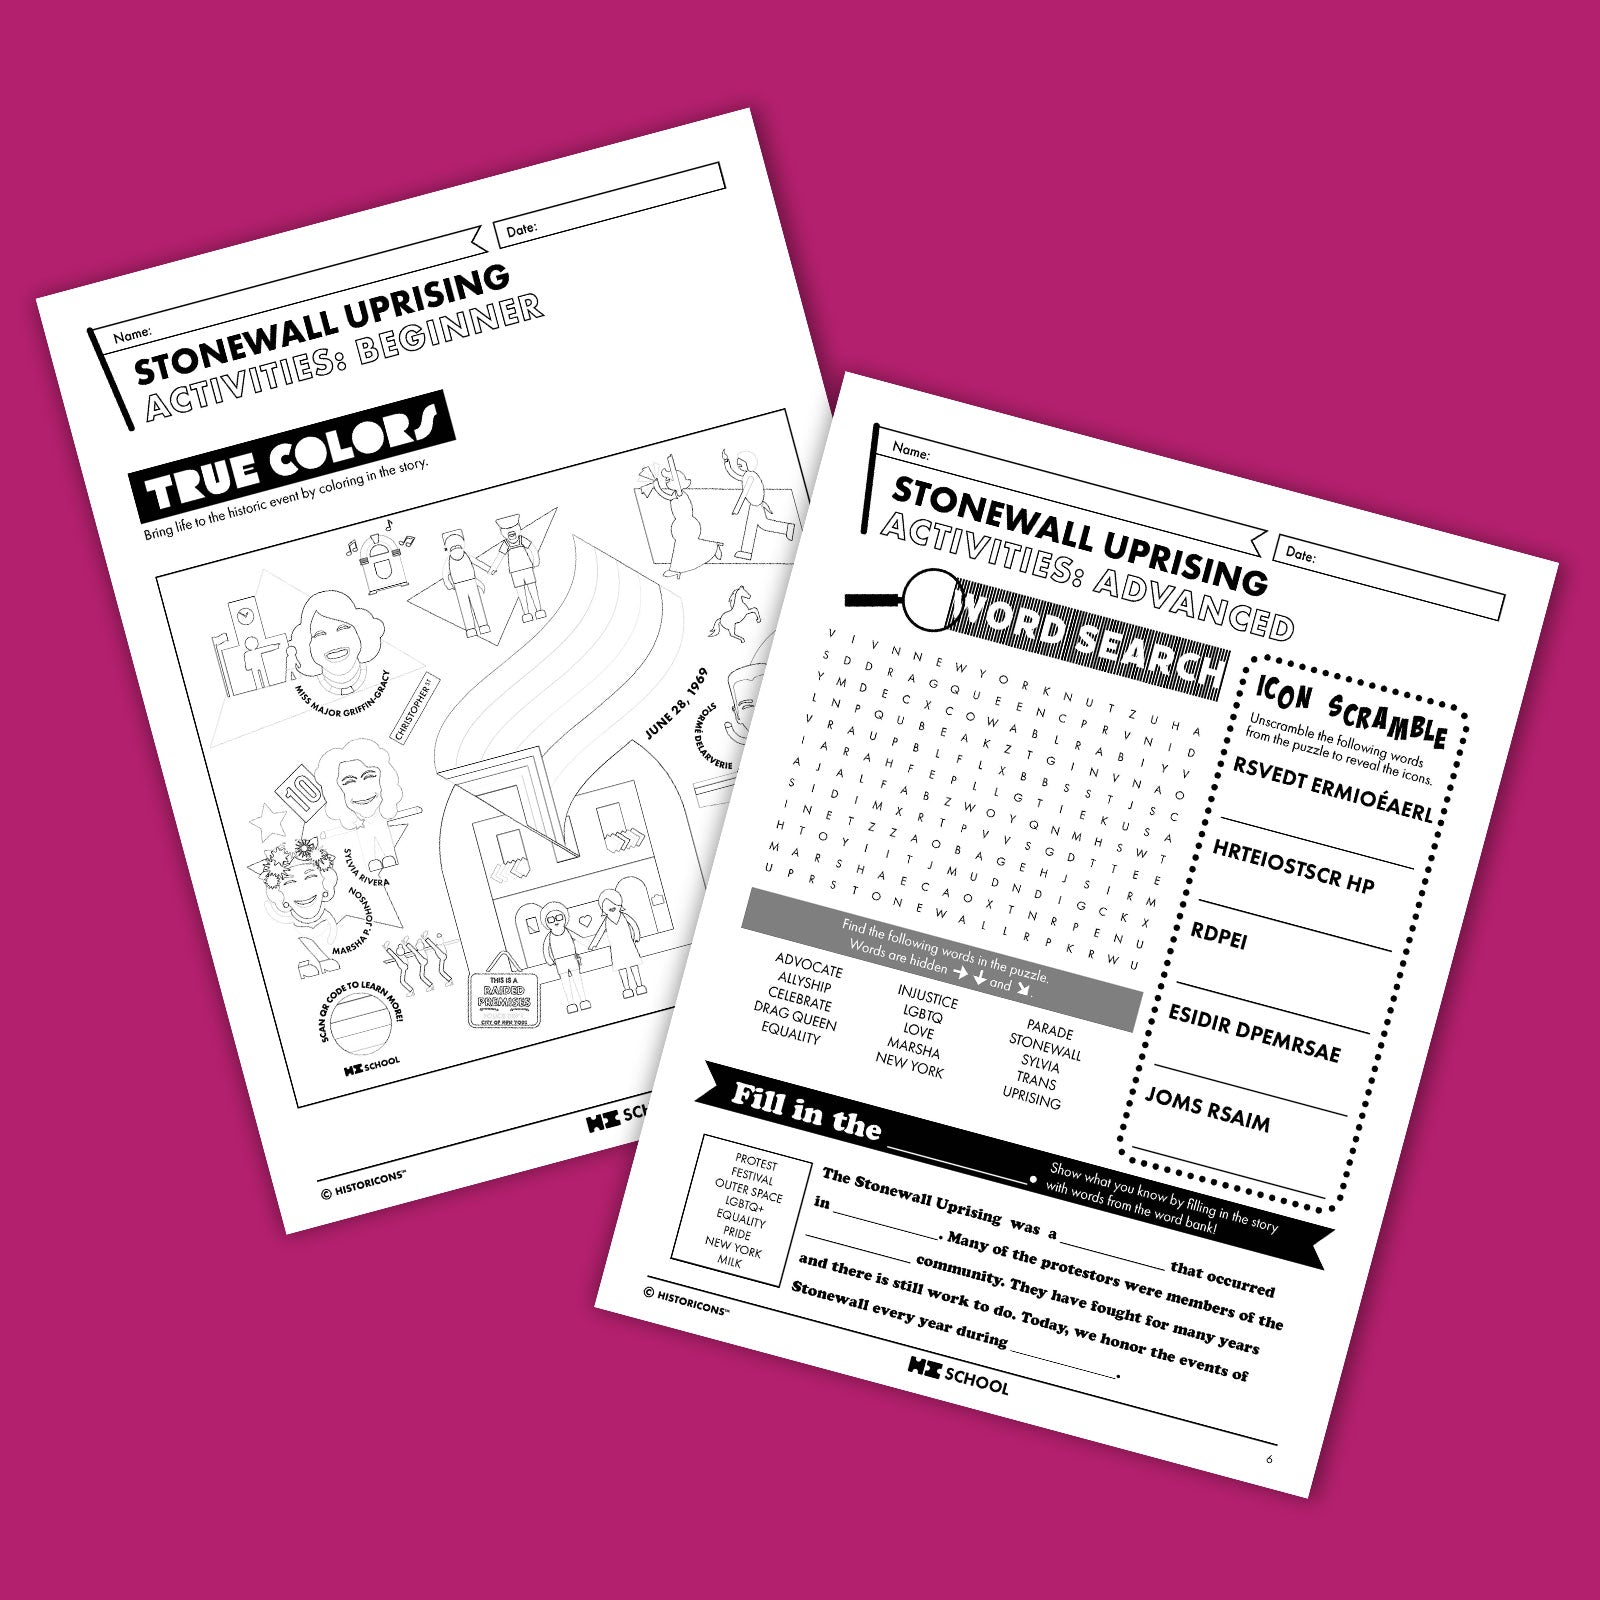 Two pages of the HI School Stonewall Uprising Activity Pack are pictured. One page is titled "Stonewall Uprising Activities: Beginner" and includes a coloring page of LGBTQ+ rights heroes. Another page is titled "Stonewall Uprising Activities: Advanced" and includes a word search, icon scramble, and fill in the blank activity.